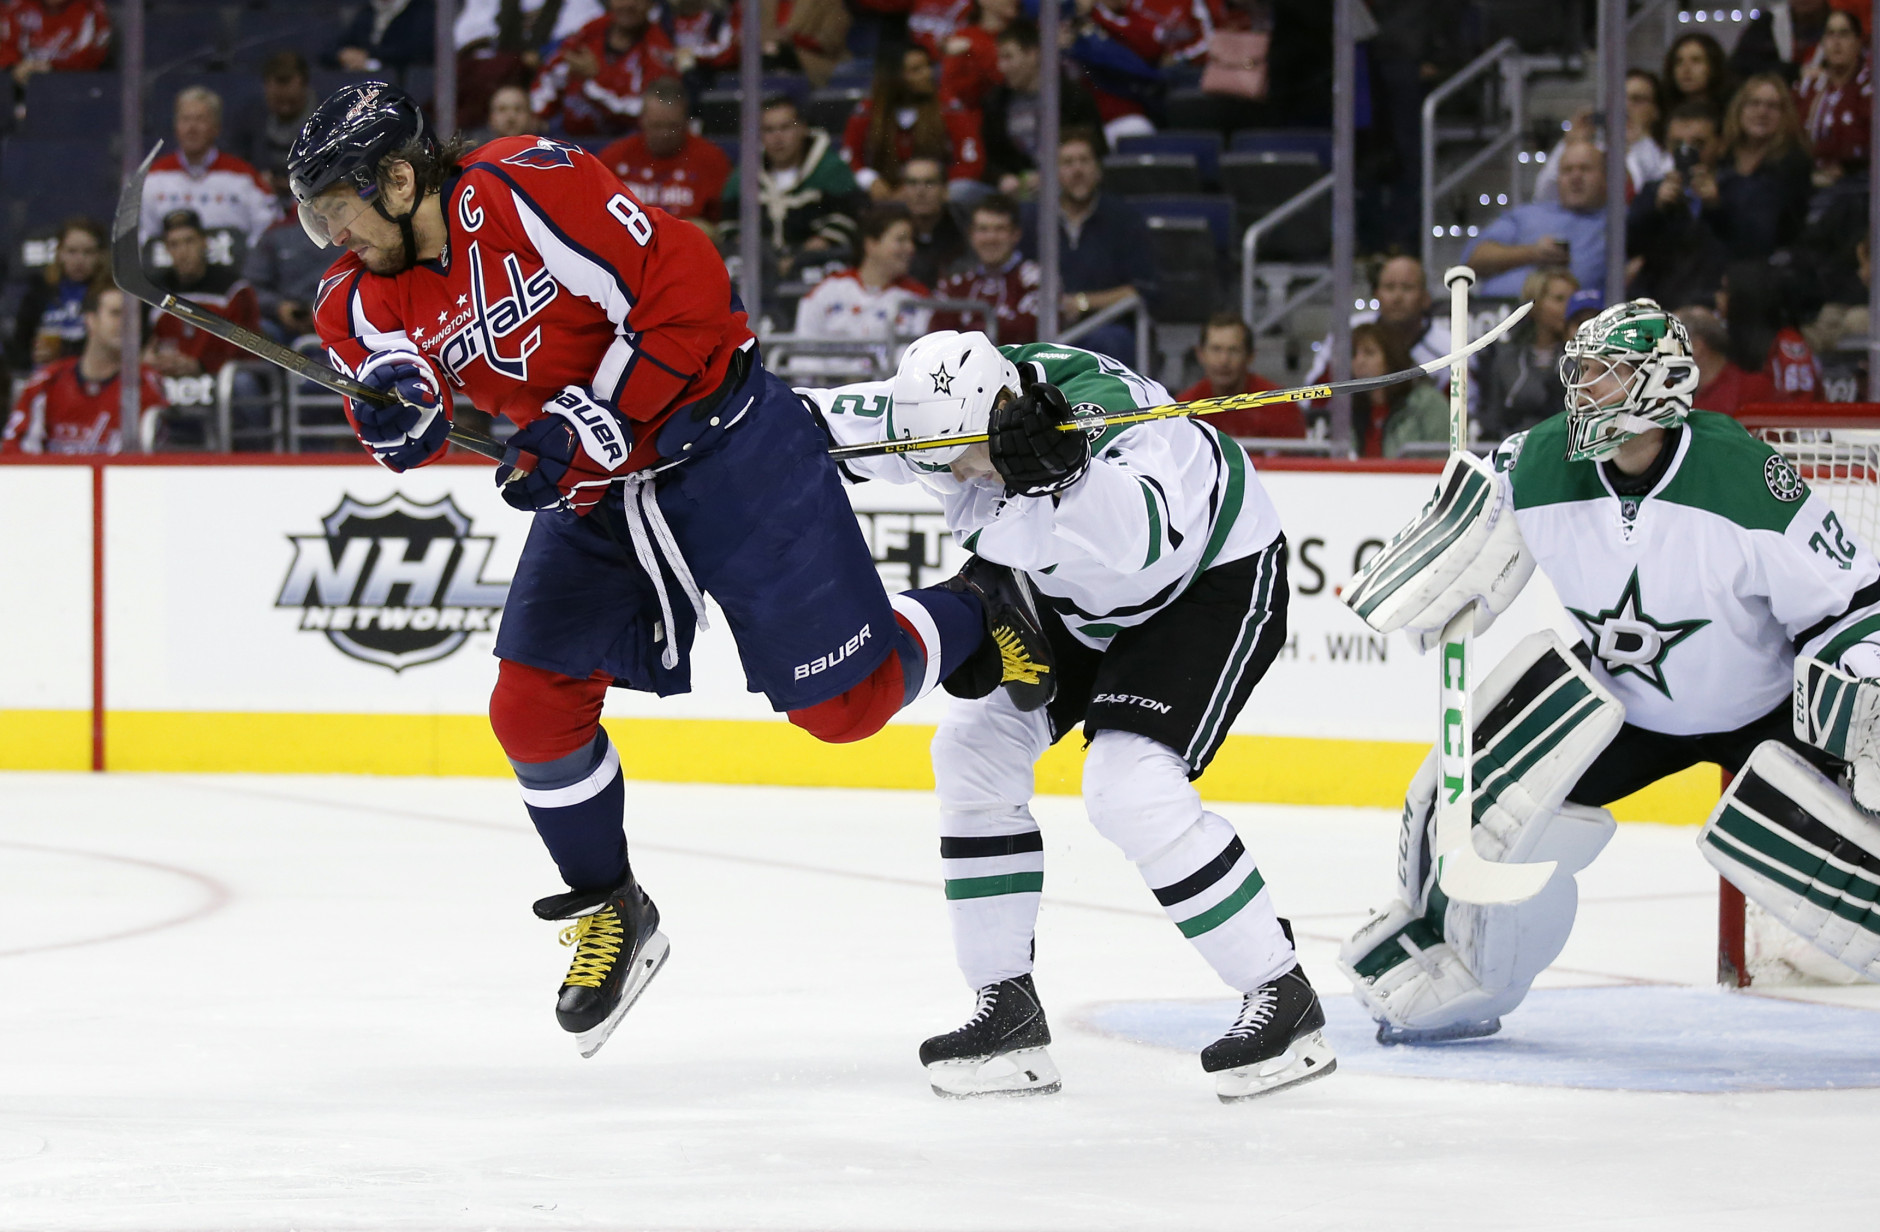 Washington Capitals left wing Alex Ovechkin (8), from Russia, is knocked from his skates by Dallas Stars defenseman Jyrki Jokipakka (2), from Finland, during the first period of an NHL hockey game, Thursday, Nov. 19, 2015, in Washington. (AP Photo/Alex Brandon)